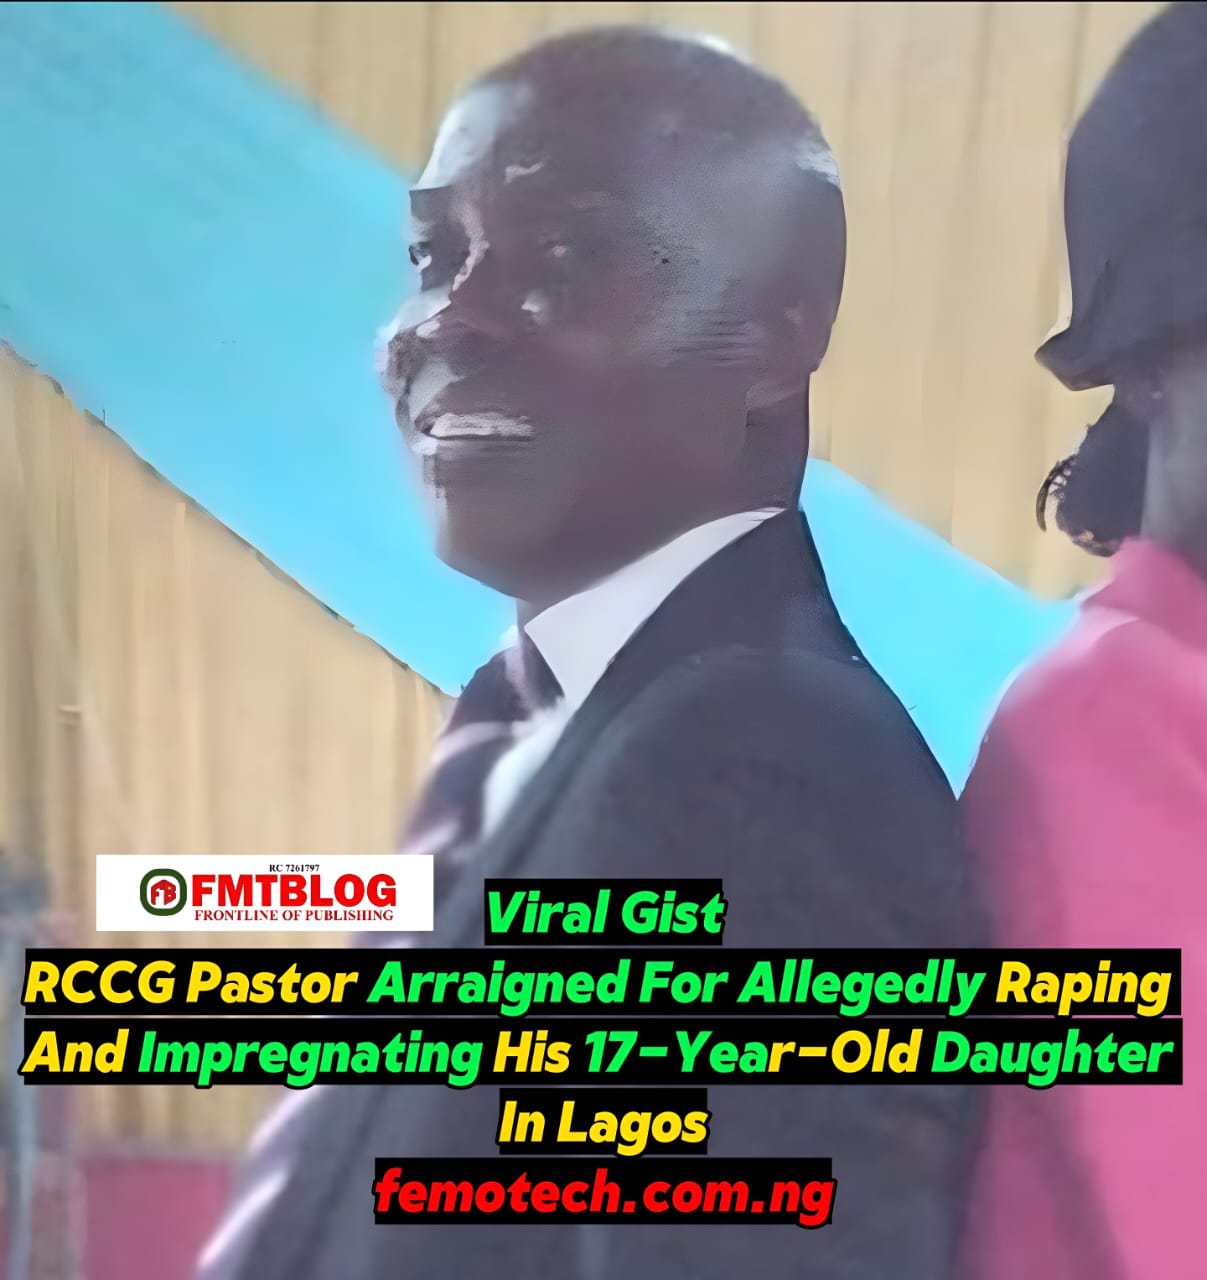 RCCG Pastor Arraigned For Allegedly Raping And Impregnating His 17-Year-Old Daughter In Lagos